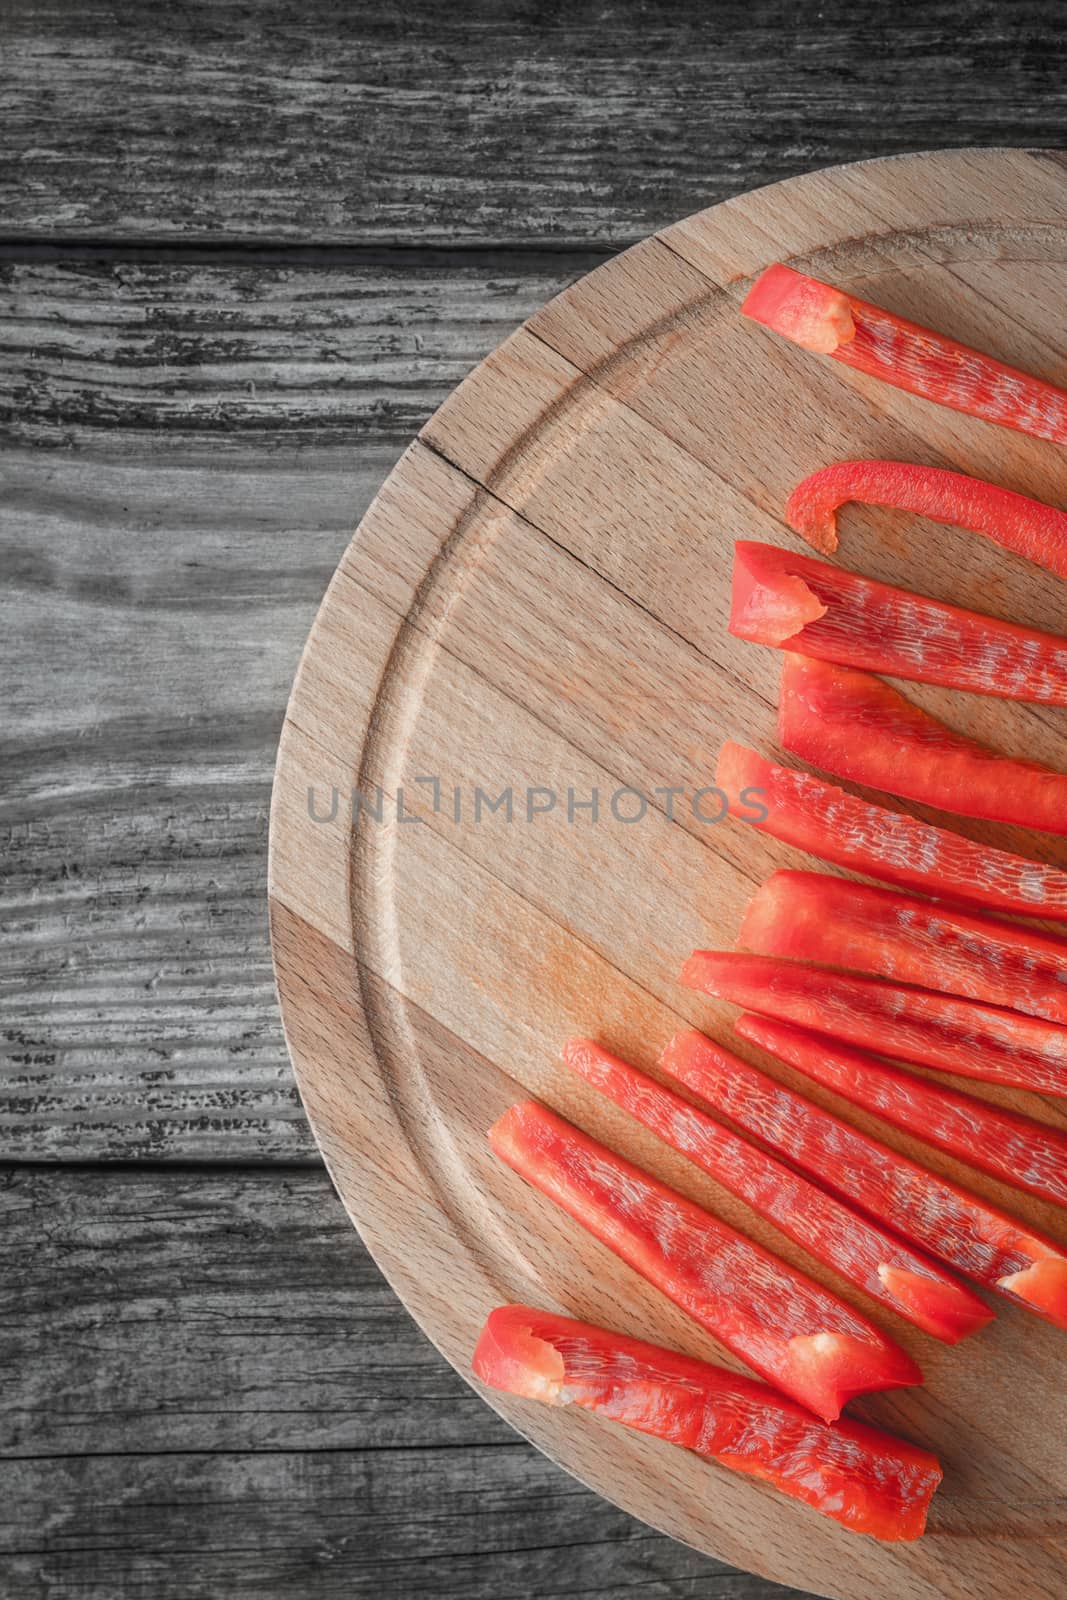 Sliced bell pepper on the wooden table vertical